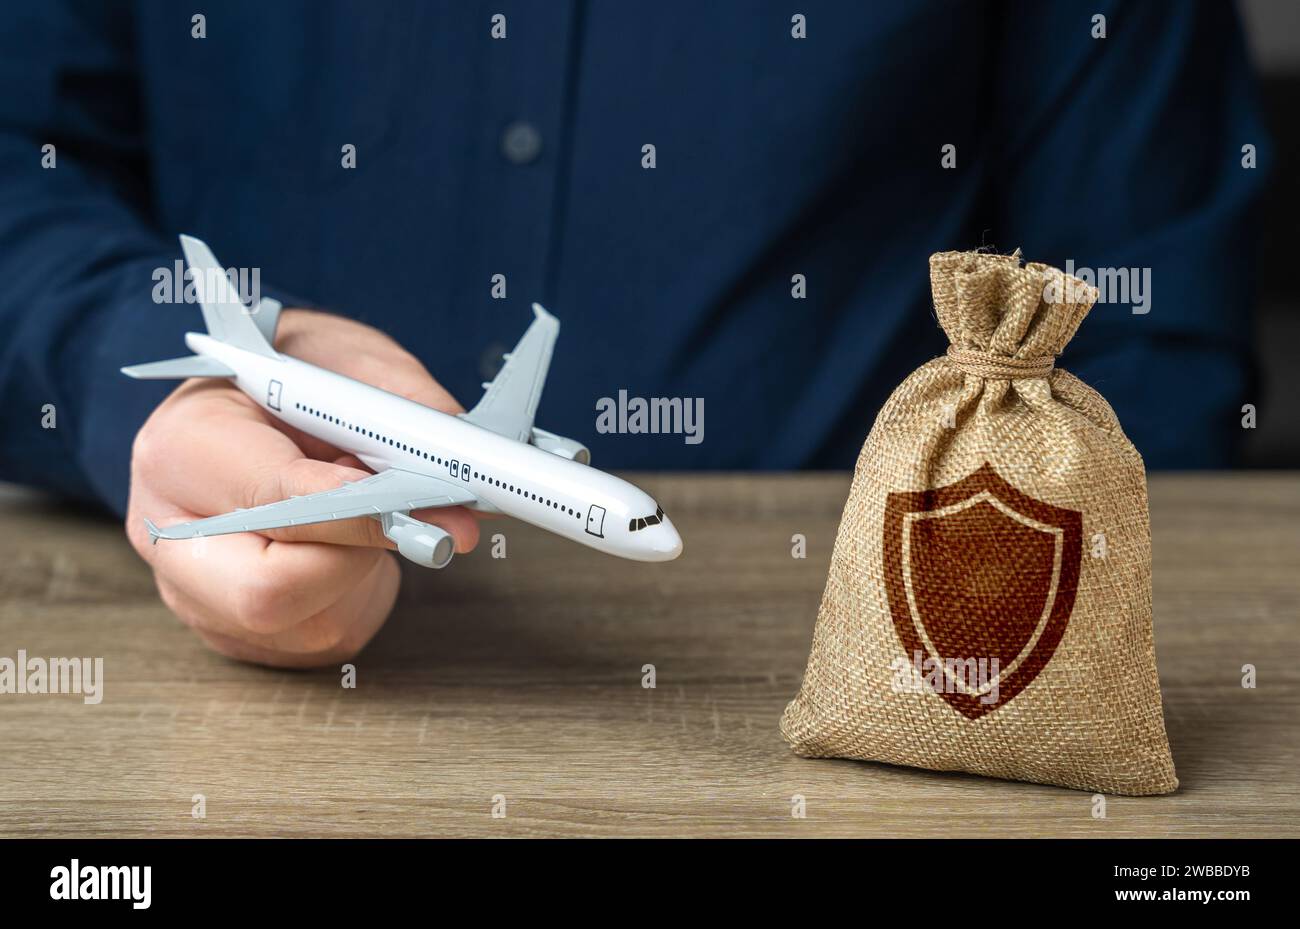 Insurance of air flights, passengers and aircraft. Protection guarantees financial coverage in case of unforeseen events, providing security for both Stock Photo